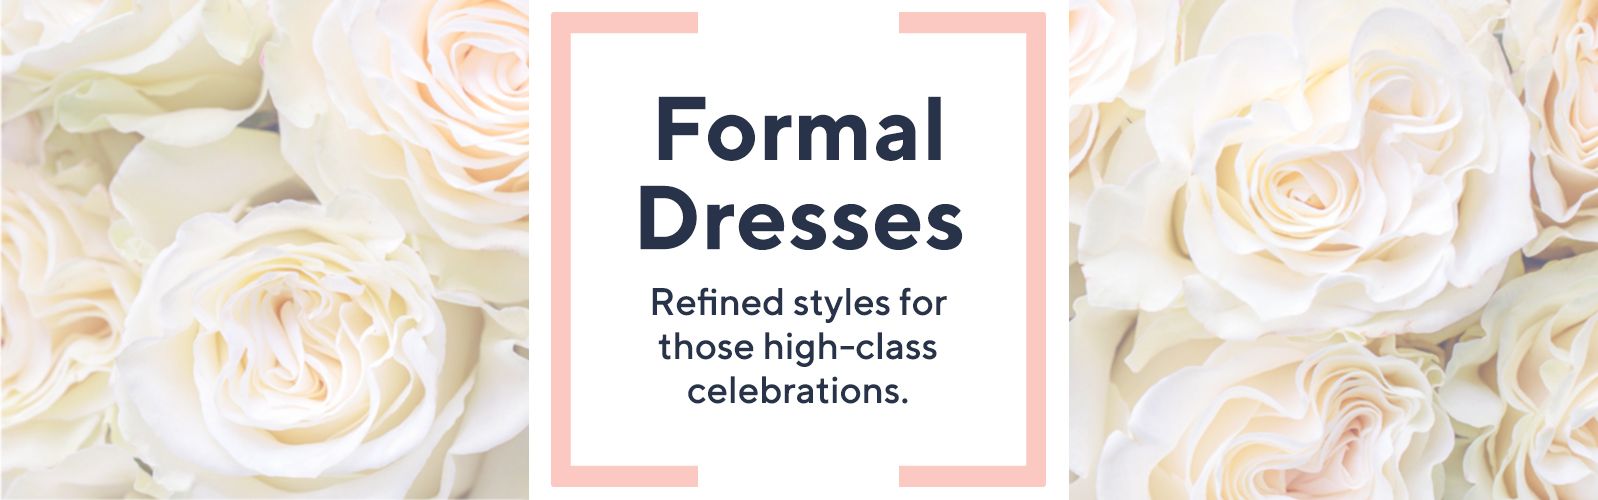 Formal Dresses Refined styles for those high-class celebrations.